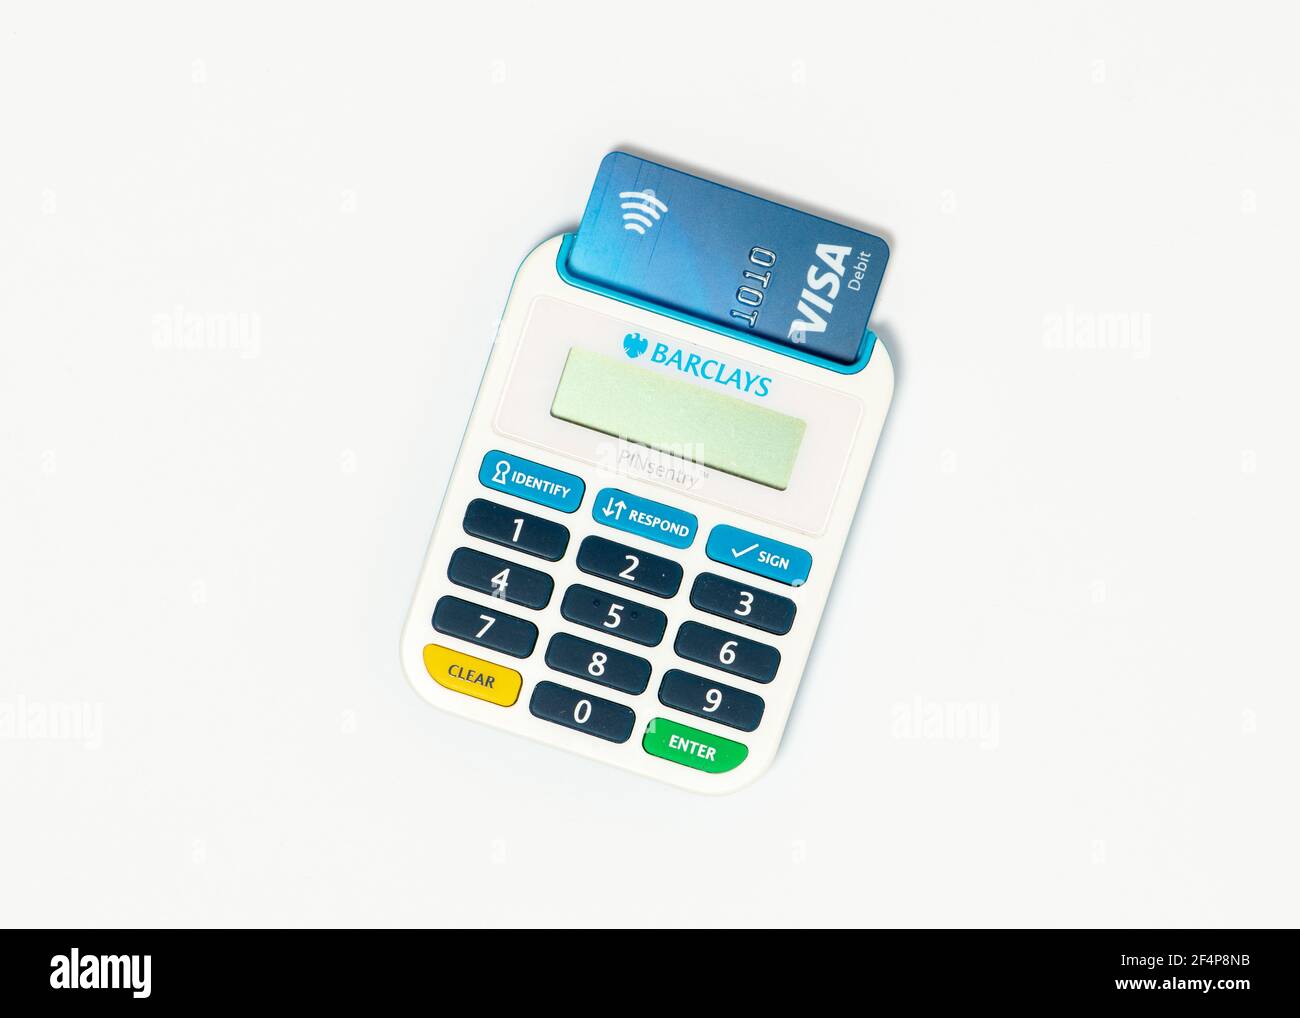 Barclays Pinsentry card reader device on white Stock Photo